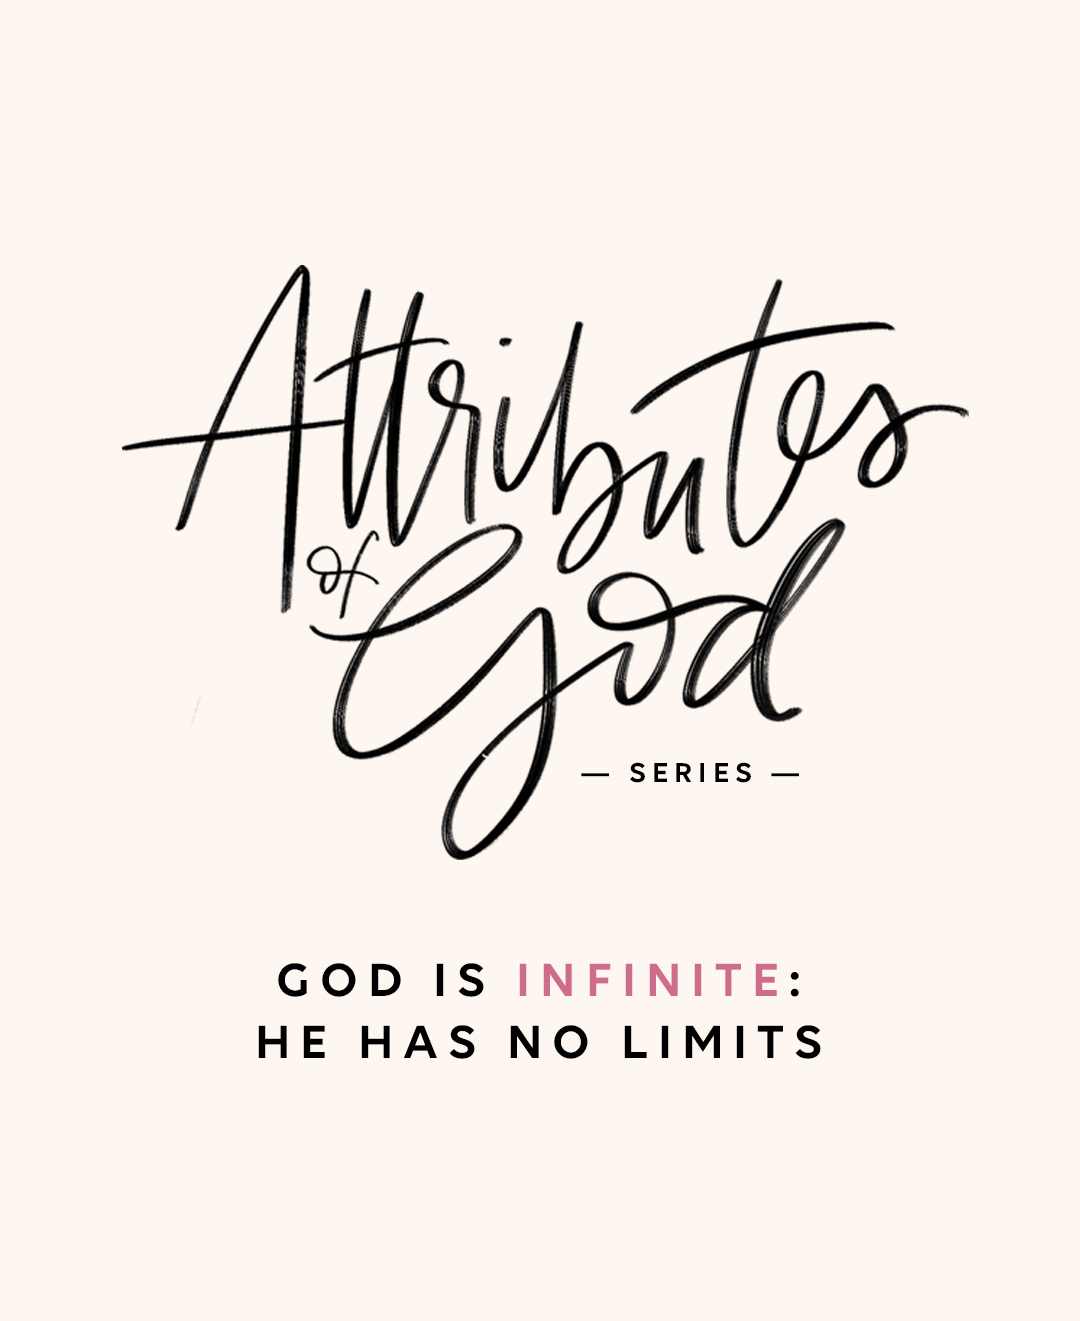 Attributes of God series; He is infinite he has no limits